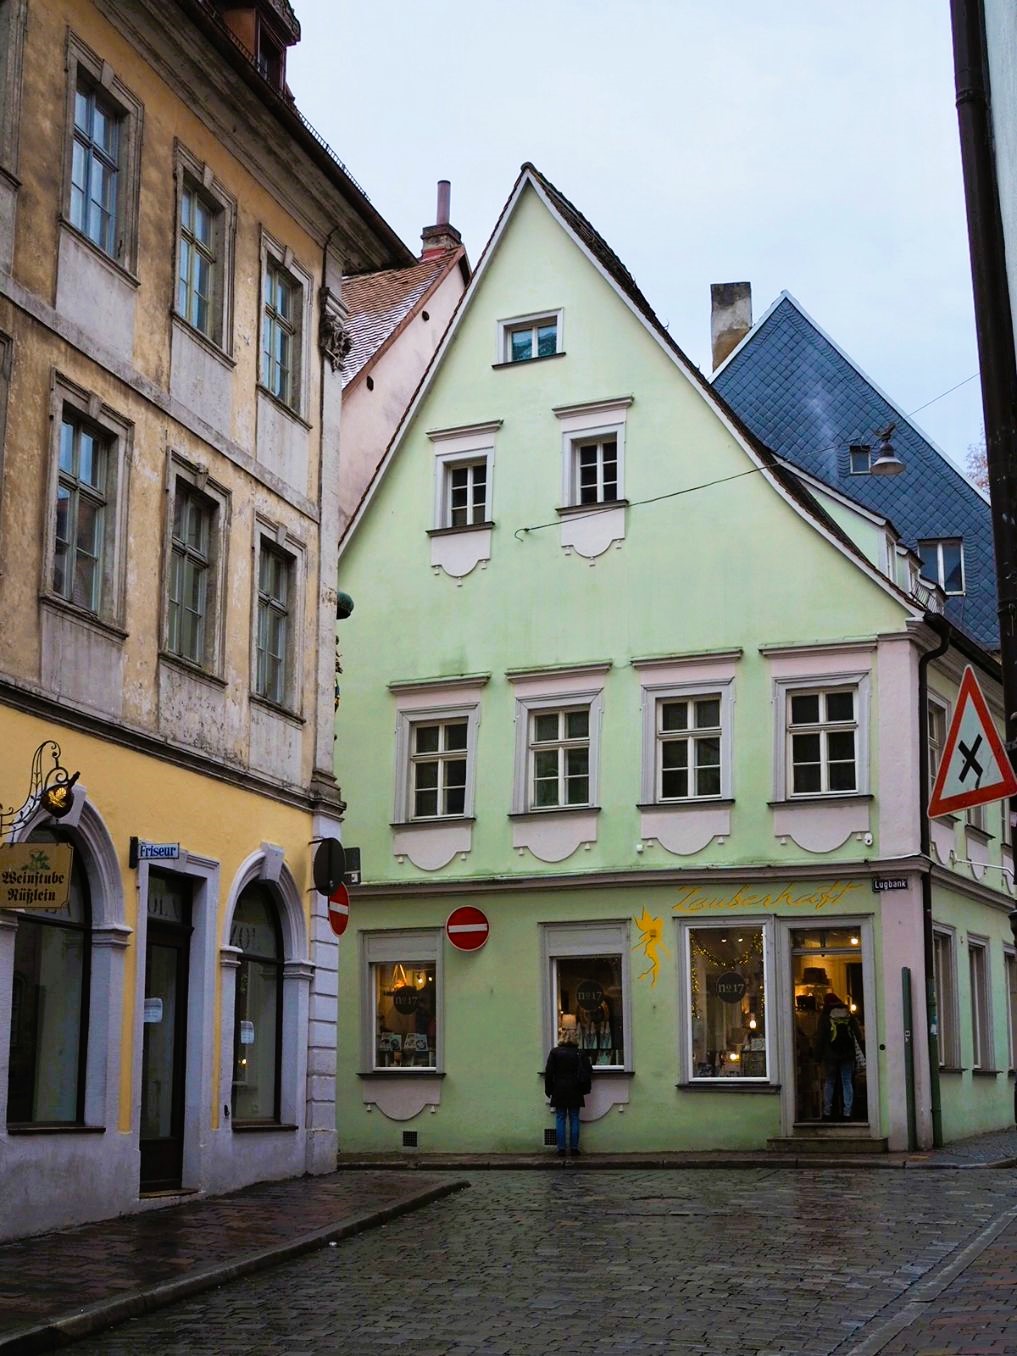 Two multi-storey townhouses are shown in the old town, one painted sunshine yellow and the other a mint green, both house shops on the first floor and have decorated window frames.